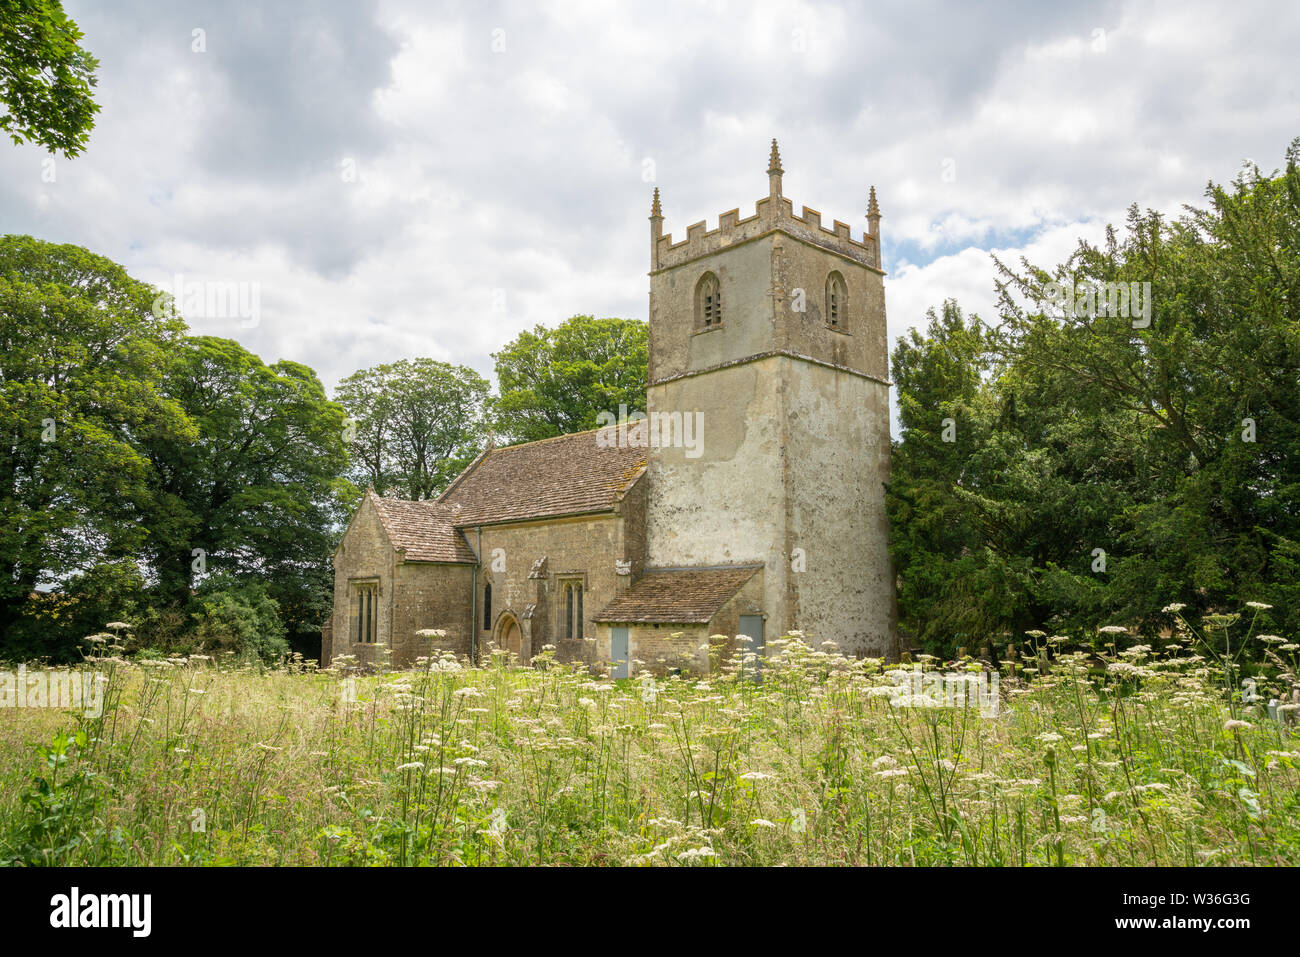 St Mary's Church, Beverston. A Norman church with an original Norman Tower. Beverston is a small Cotswolds village, Gloucestershire, United Kingdom Stock Photo